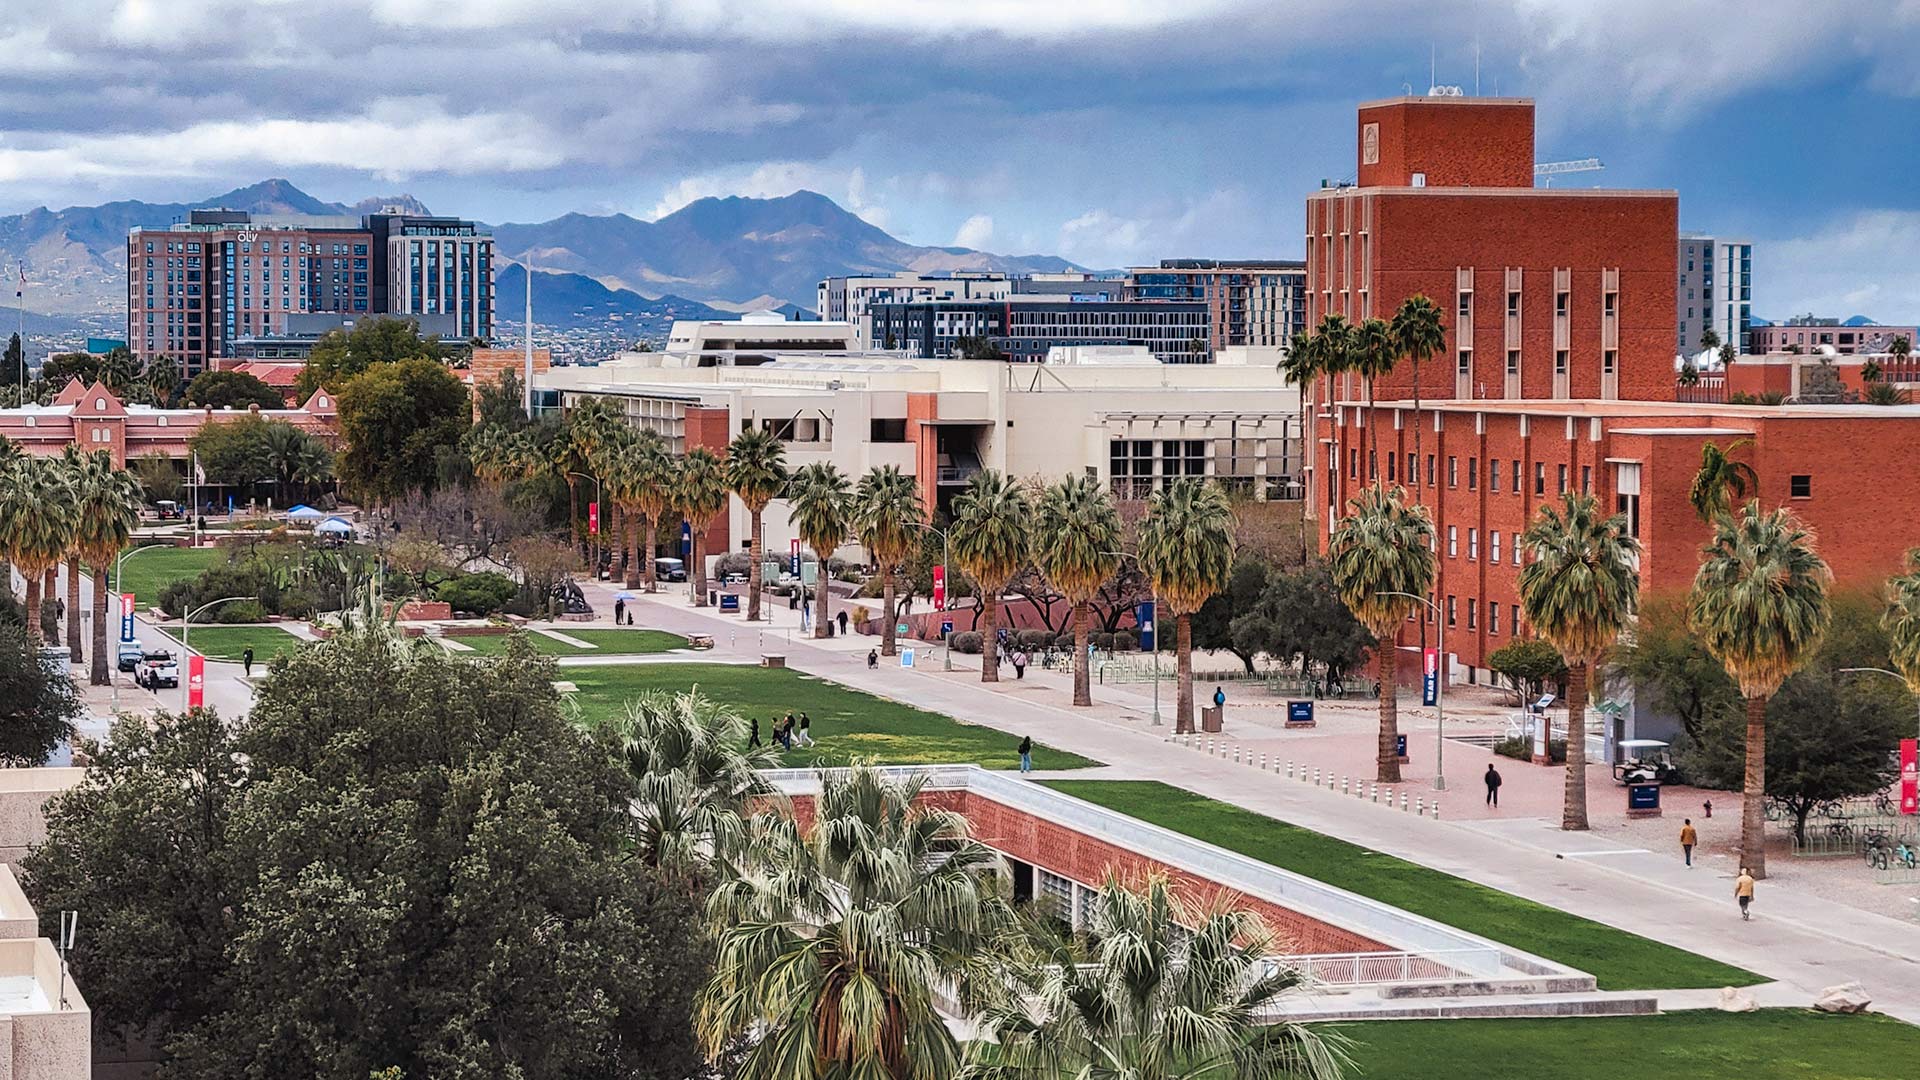 Looking west across the University of Arizona mall. The Student Union Memorial Center and Old Main can both been seen.